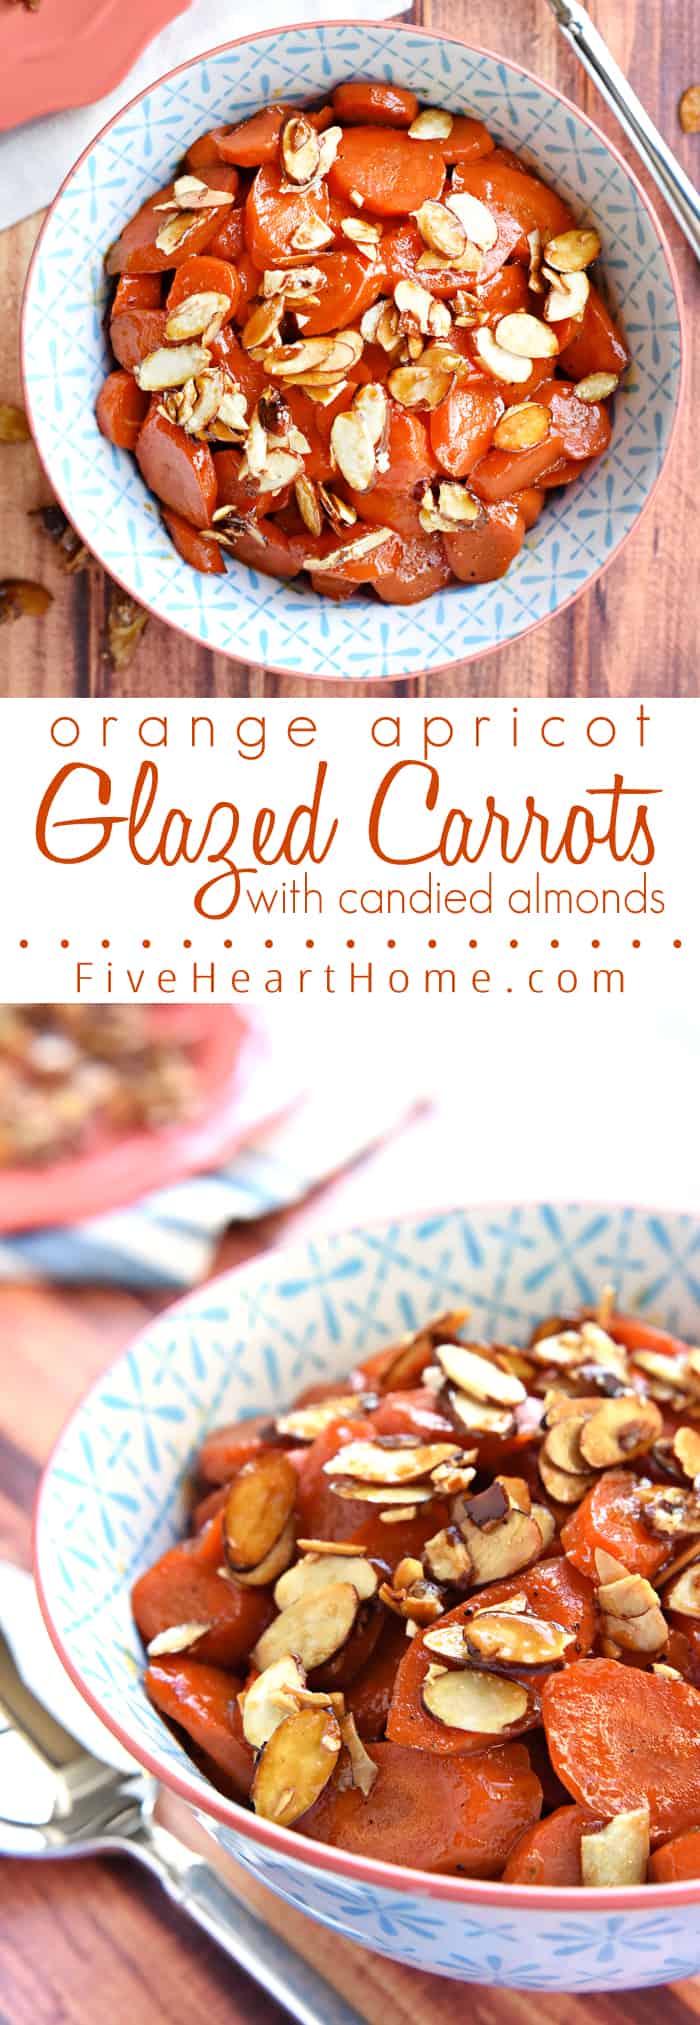 Orange Apricot-Glazed Carrots with Candied Almonds Collage with Text Overlay 